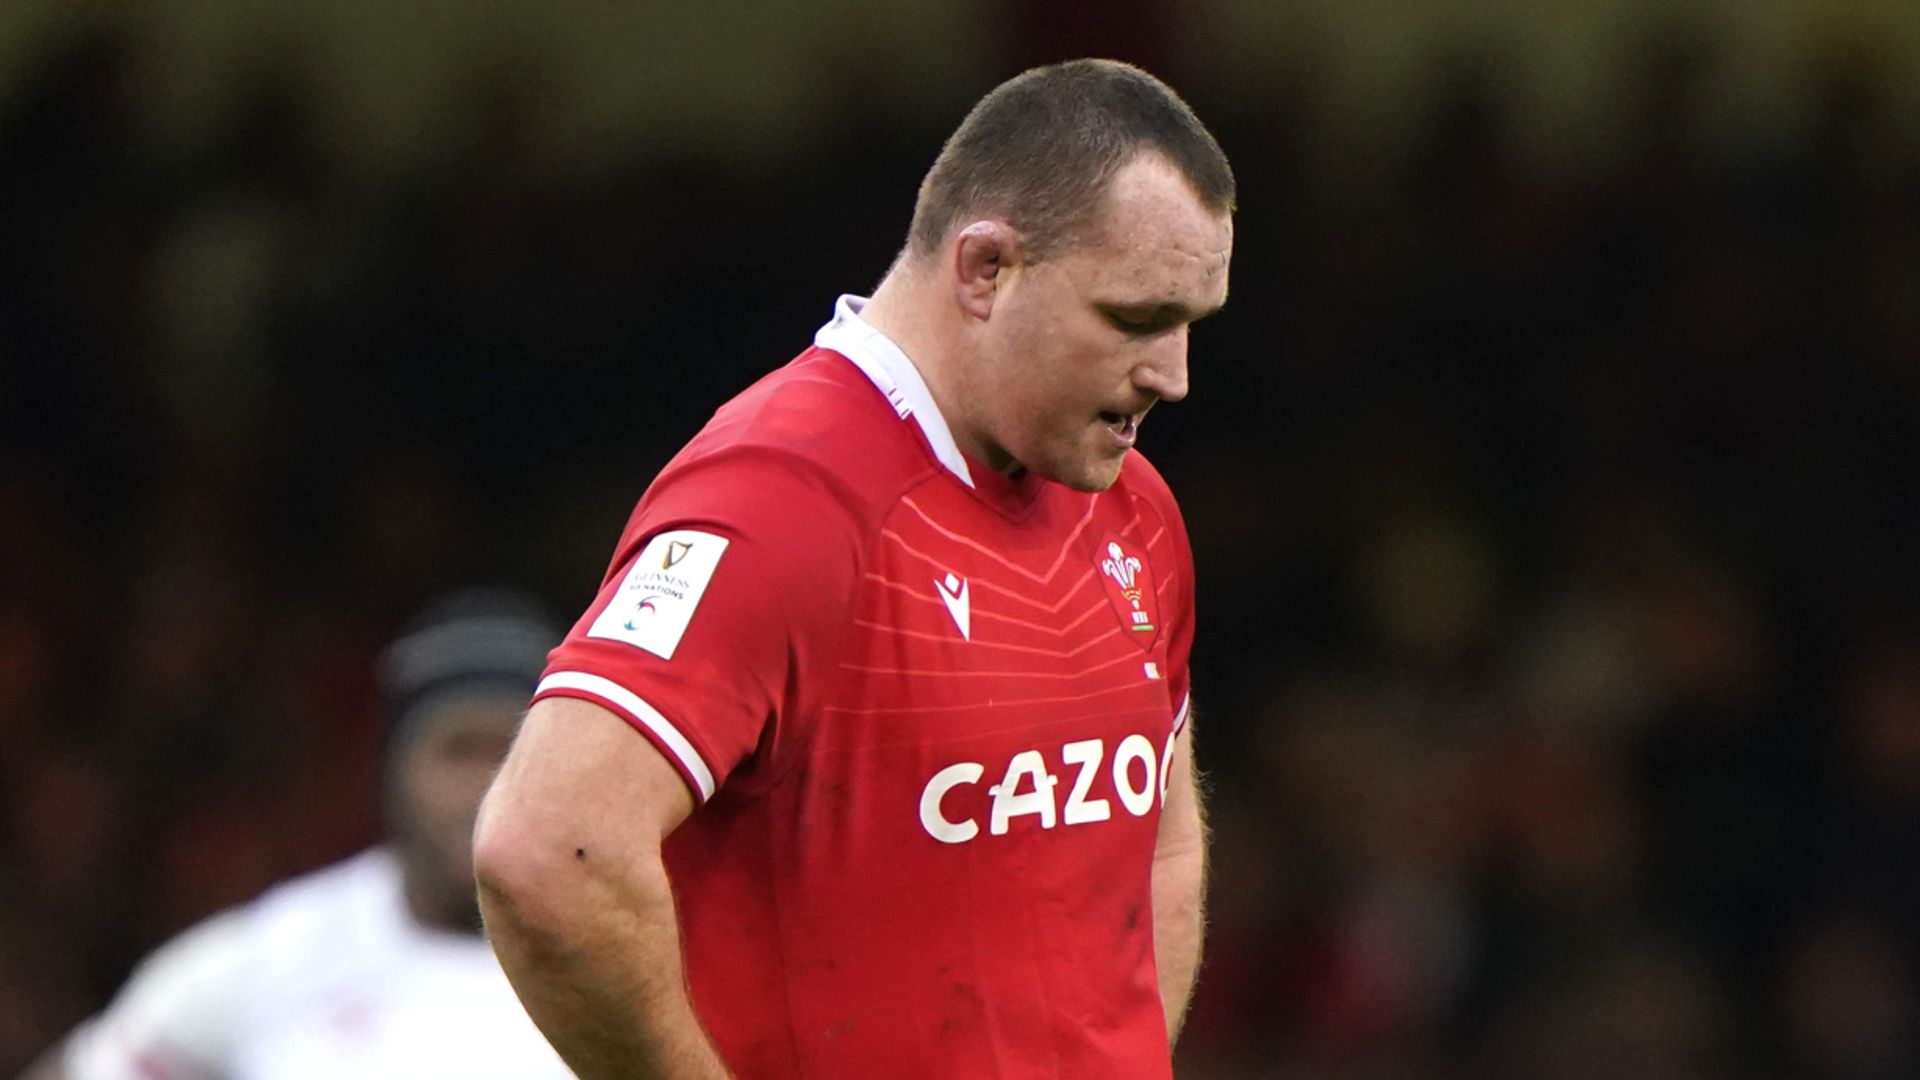 Wales captain Owens ruled out of World Cup